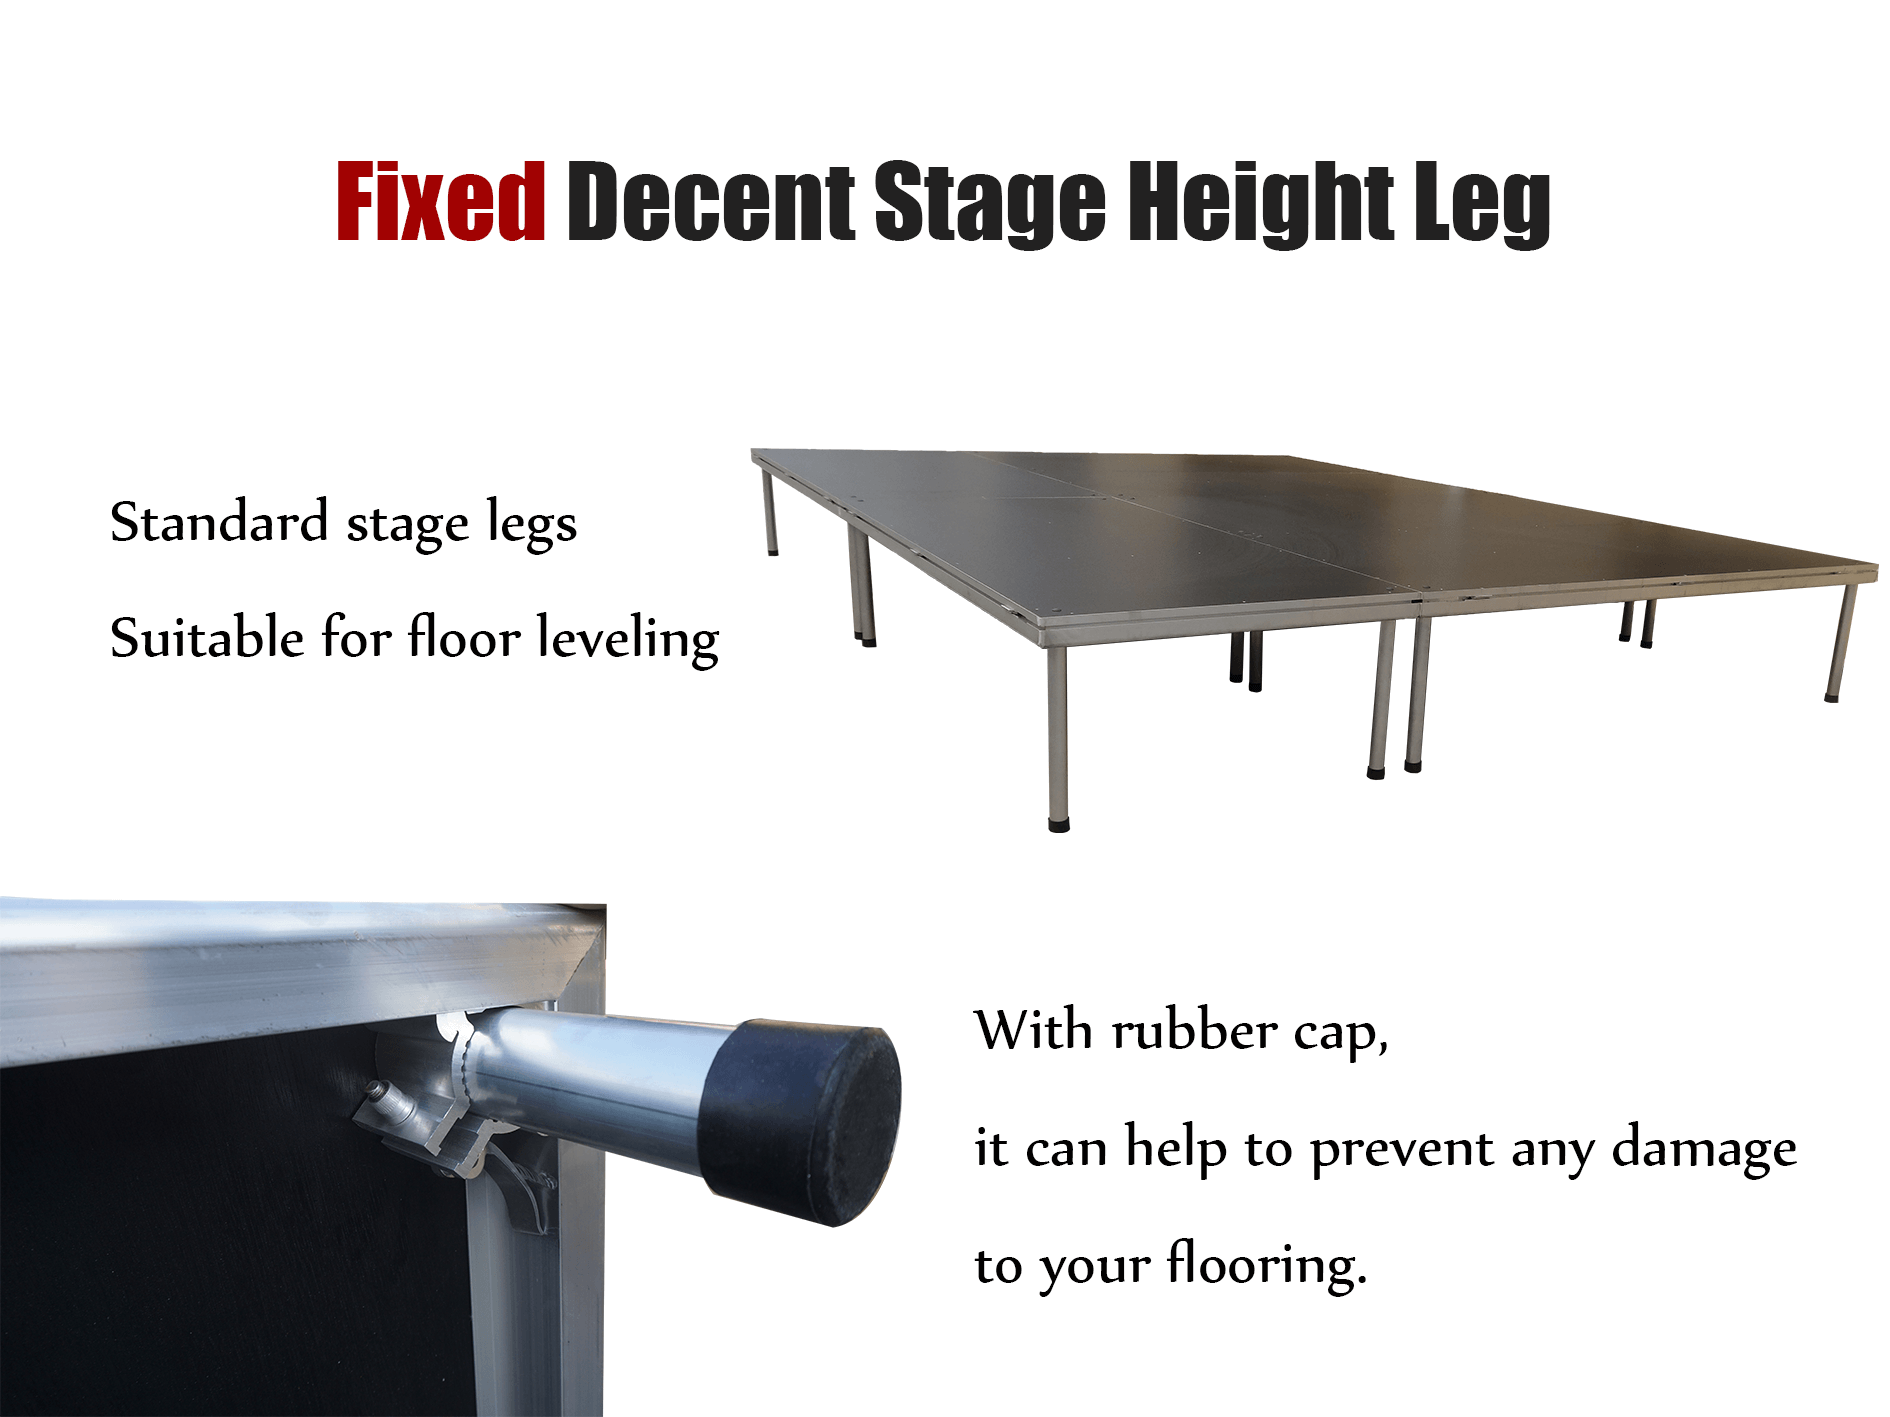 fixed decent stage leg